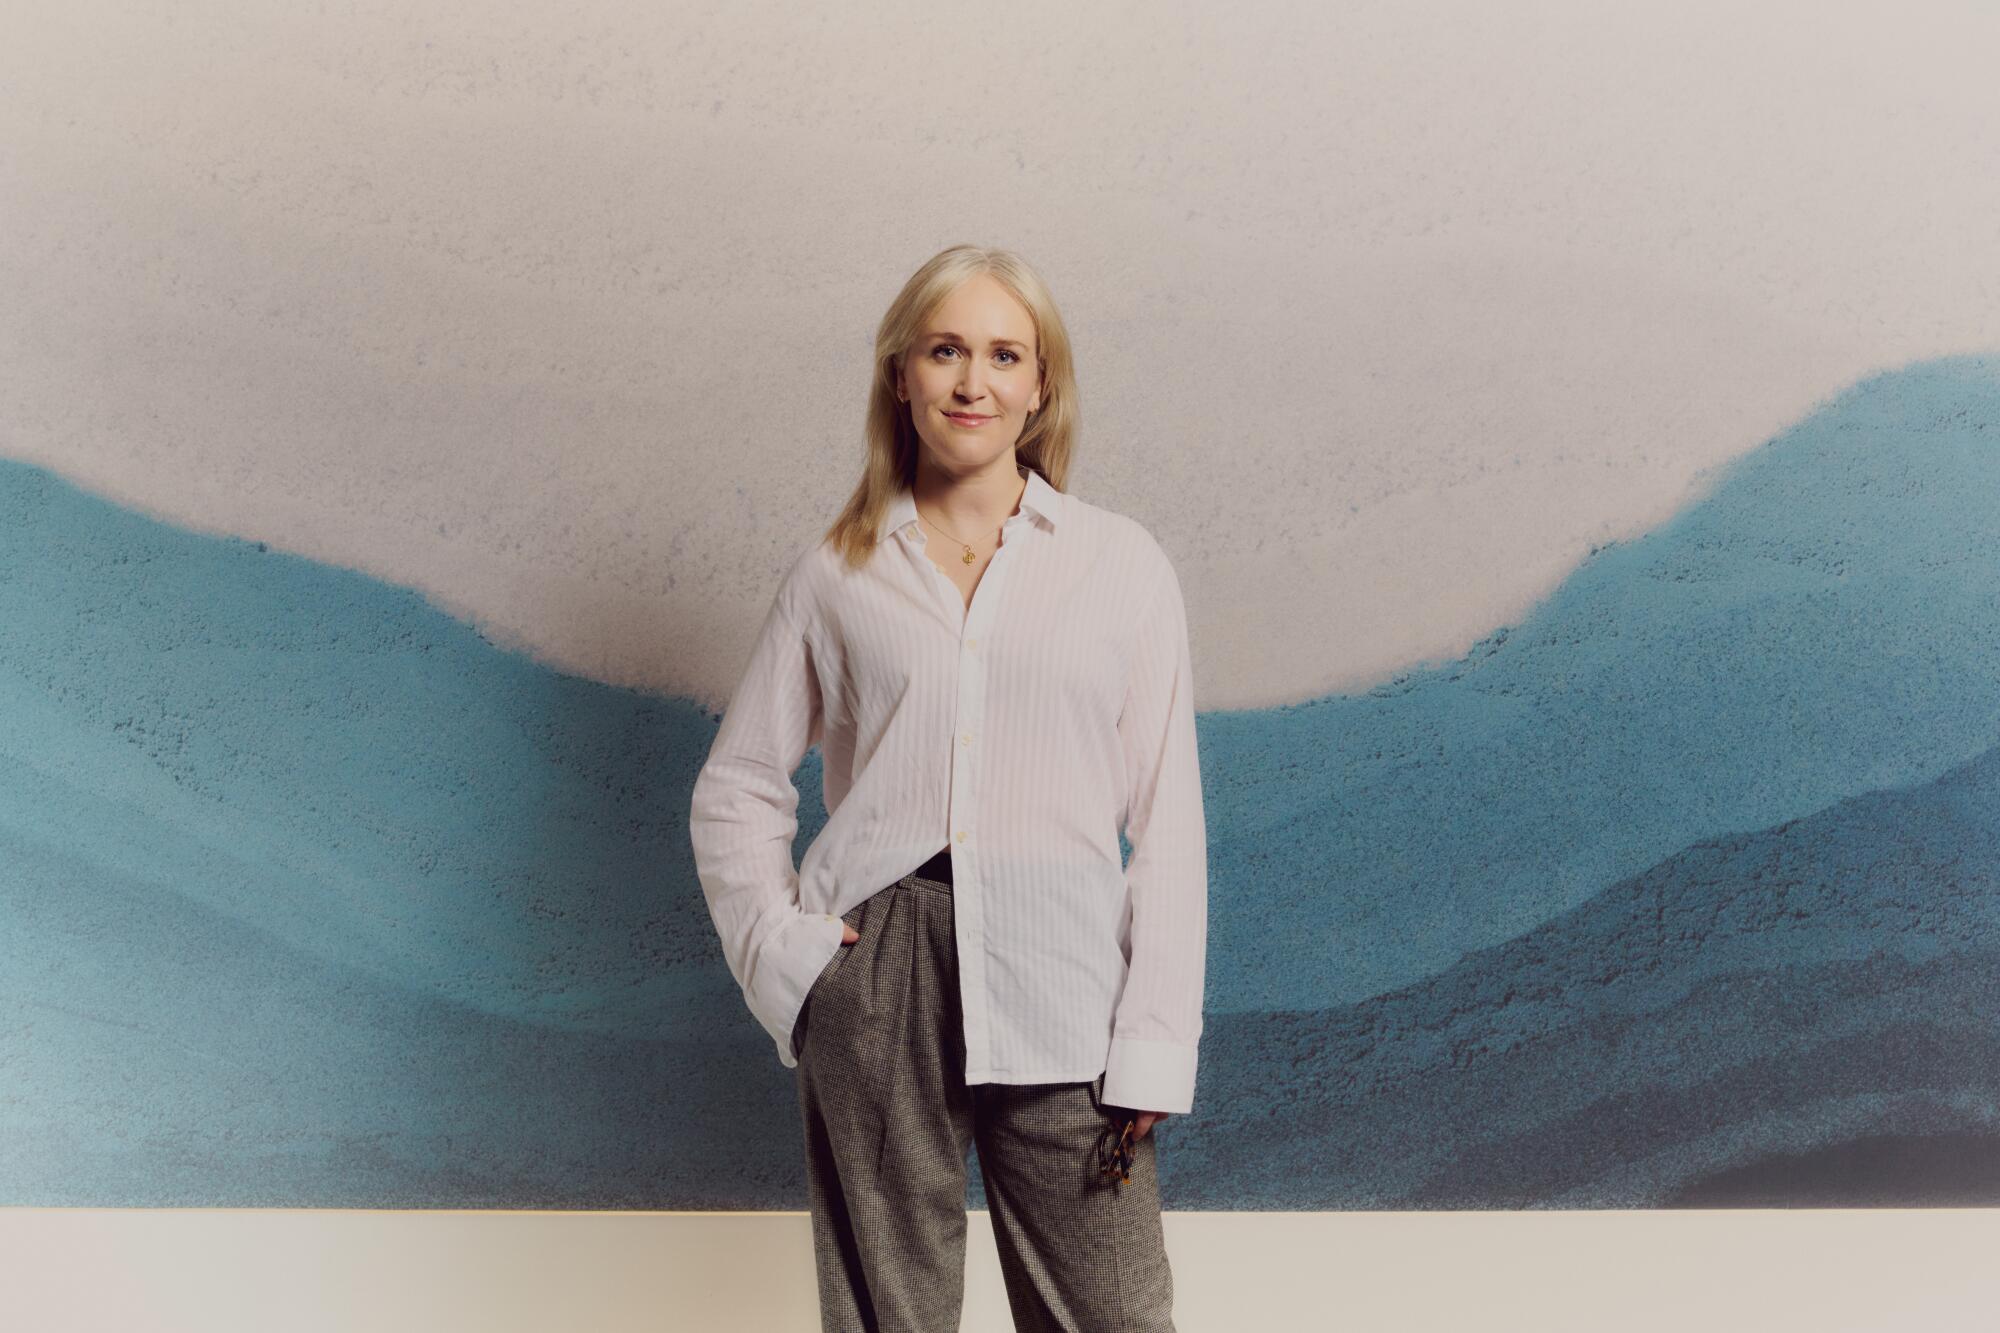 A blond woman, wearing a white button-down shirt and gray trousers, poses with her right hand in her pocket.